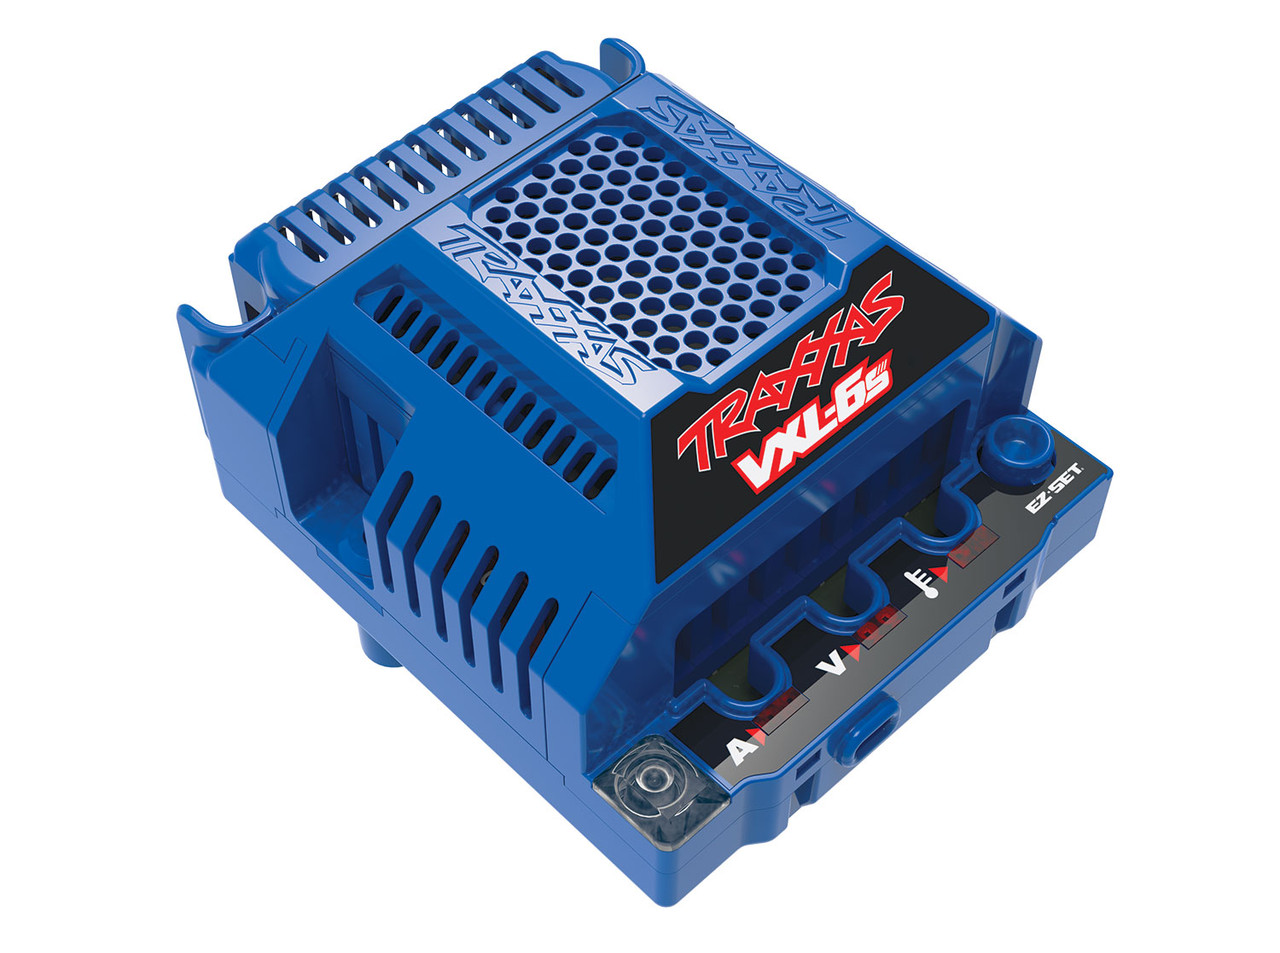 Traxxas 3485 Velineon VXL-6s Waterproof Brushless Electronic Speed Control